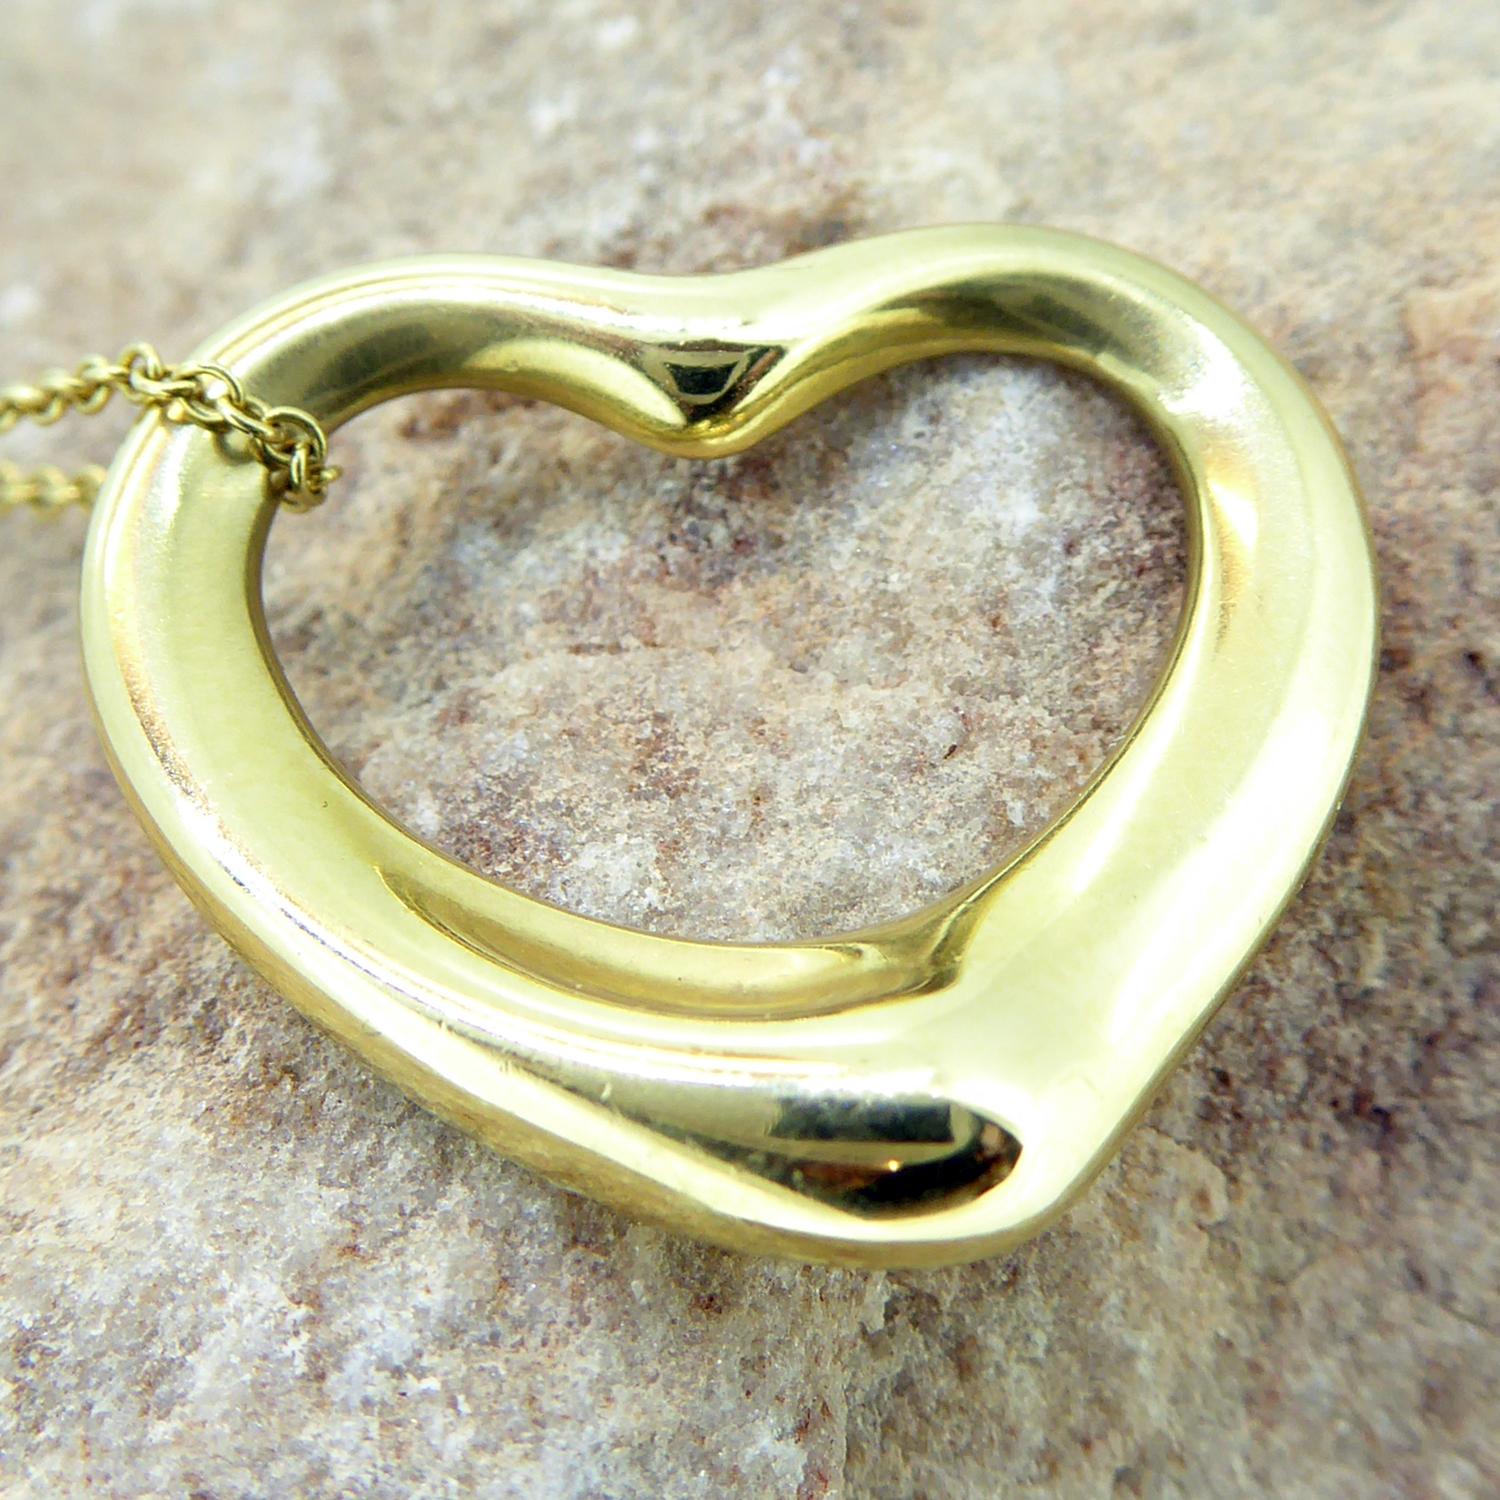 A pre-owned gold heart pedant from Tiffany, part of the Elsa Peretti collection for the iconic design house.  Crafted in 18ct yellow gold the heart measures approx. 22mm wide and suspends from a gold trace chain.  The pendant is polished and is